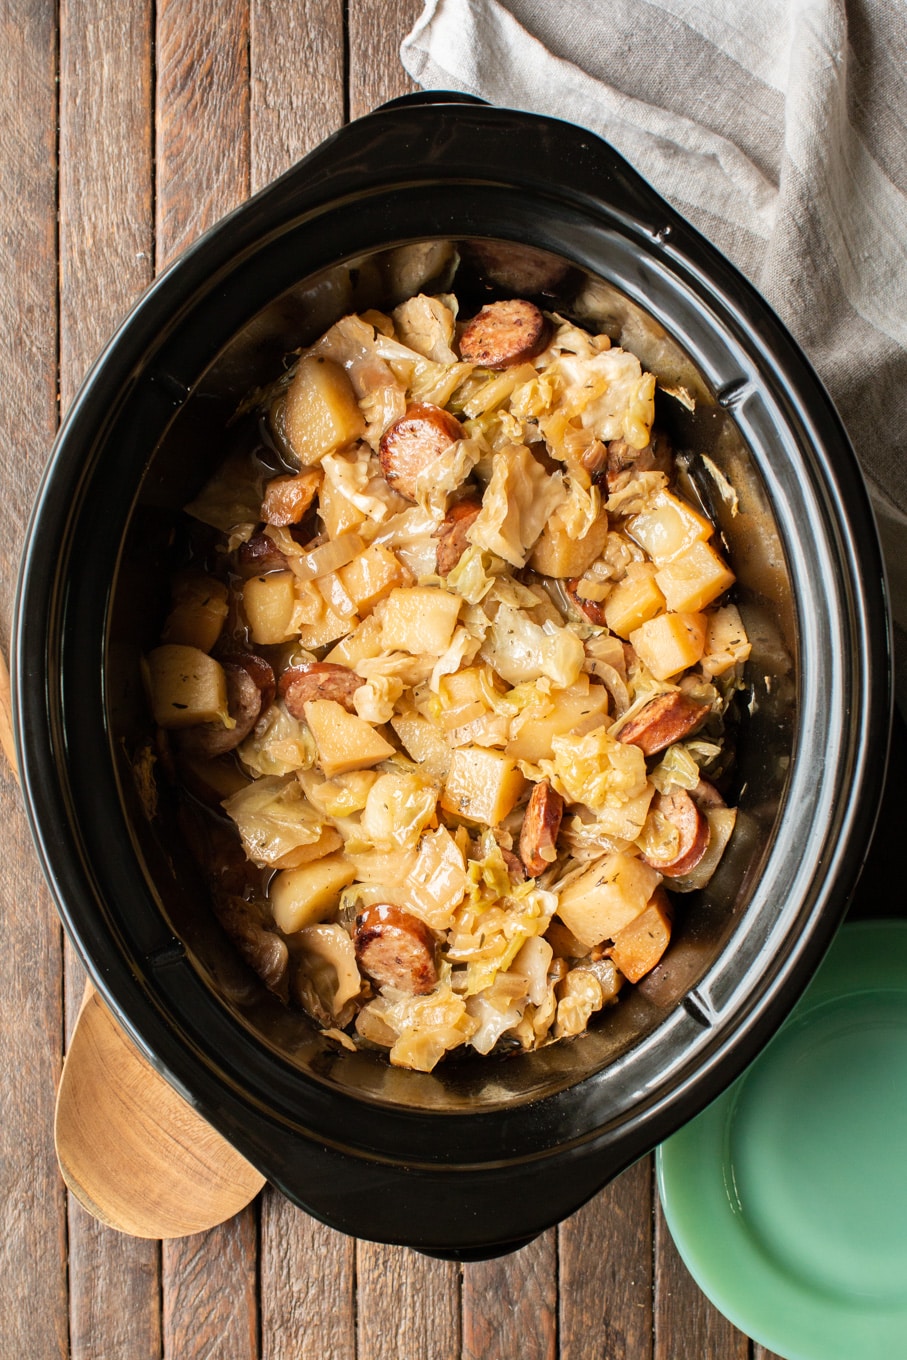 cooked potatoes, cabbage, and sliced kielbasa in a slow cooker.